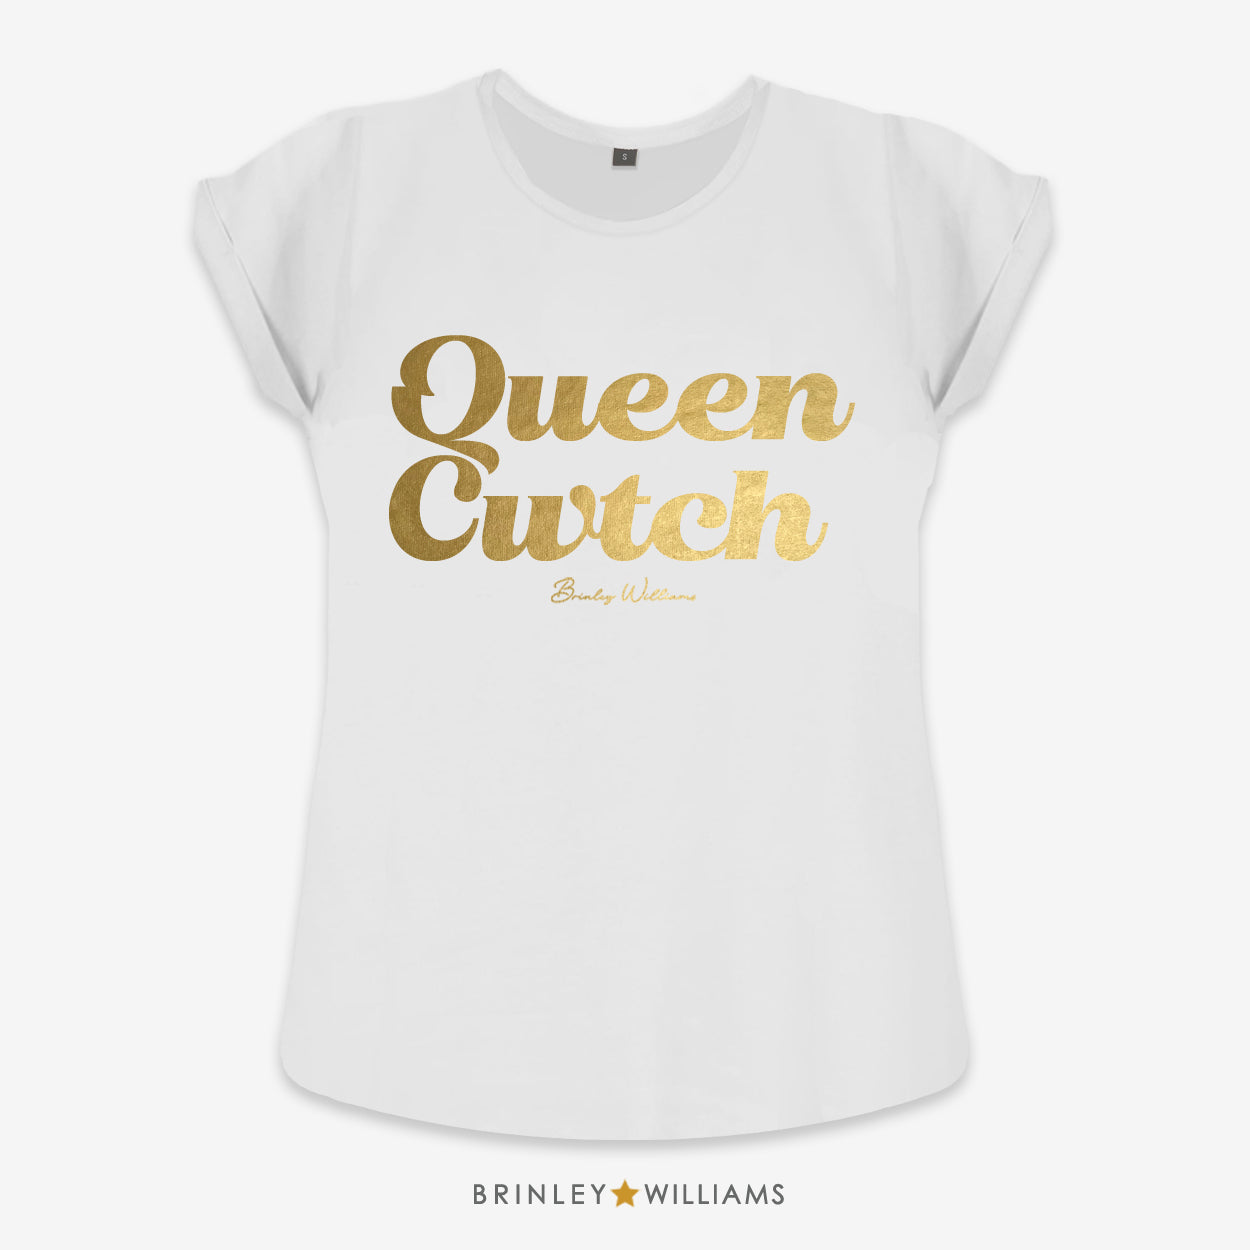 Queen Cwtch Rolled Sleeve T-shirt - White